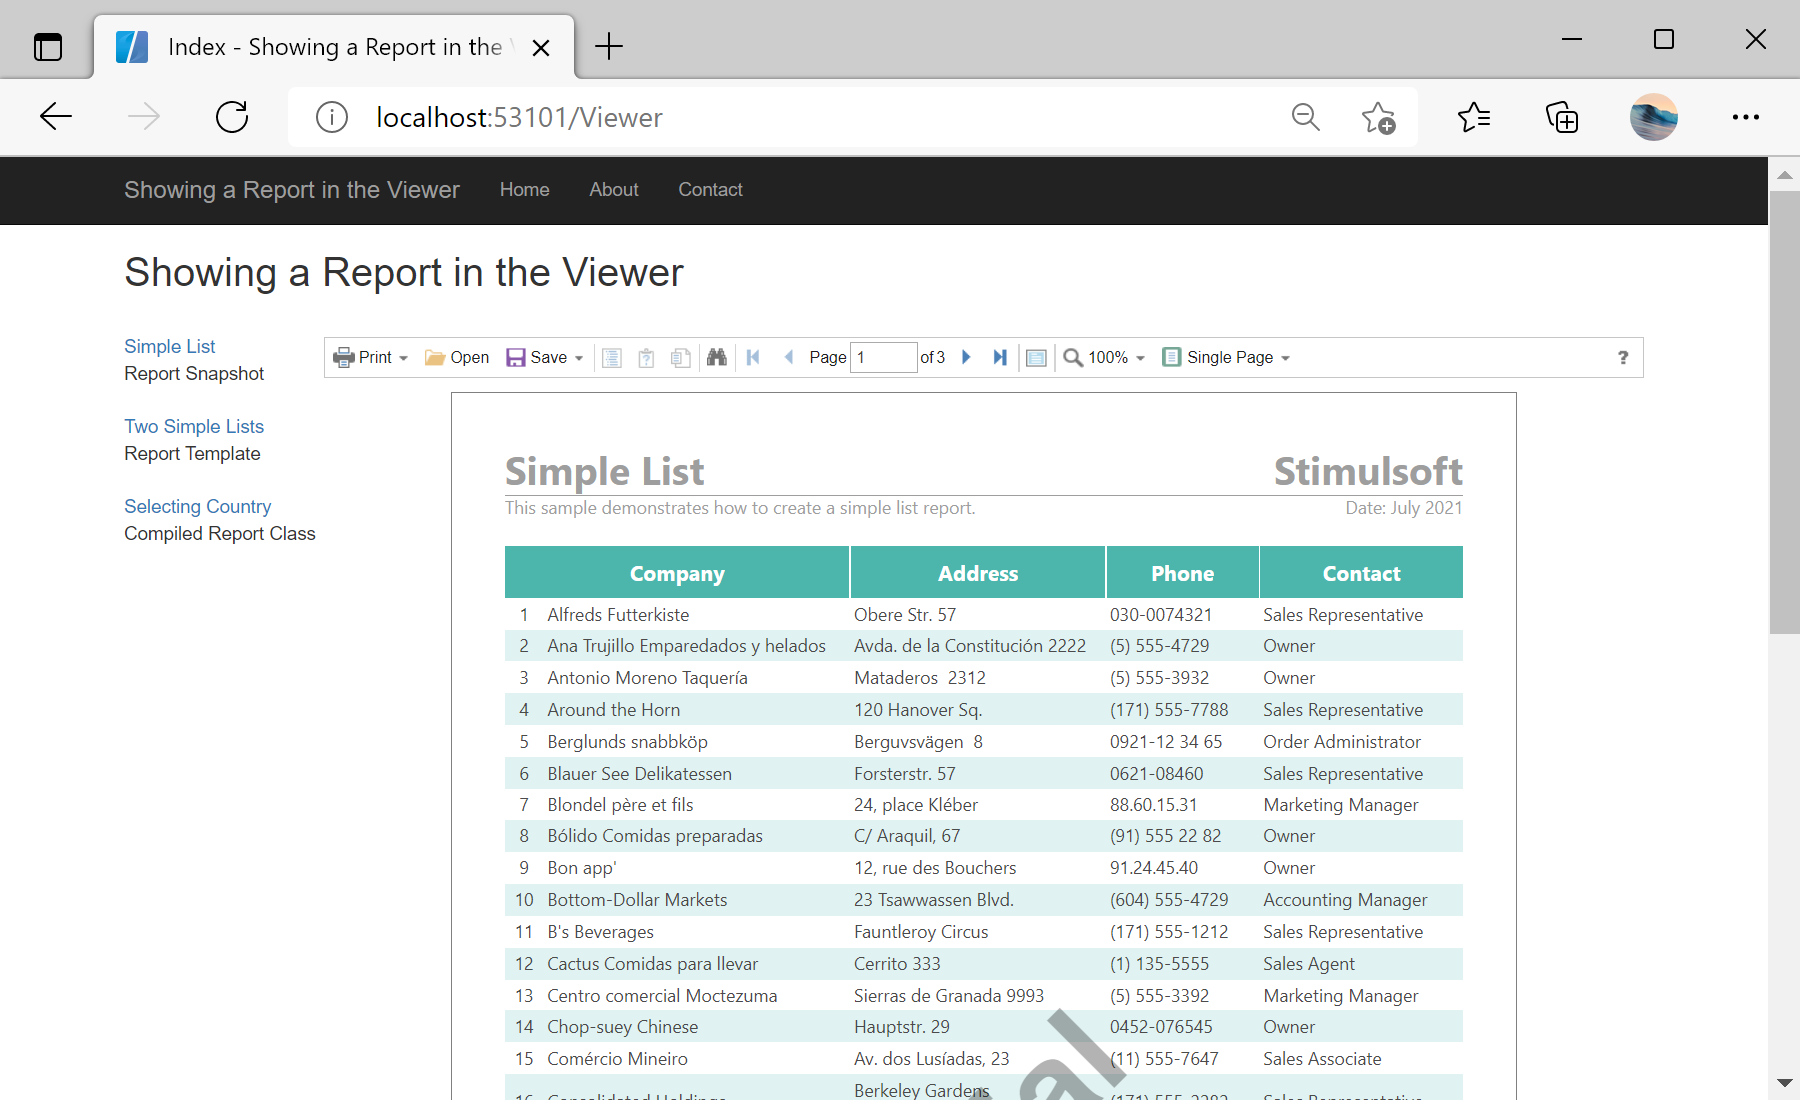 Showing a Report in the Viewer